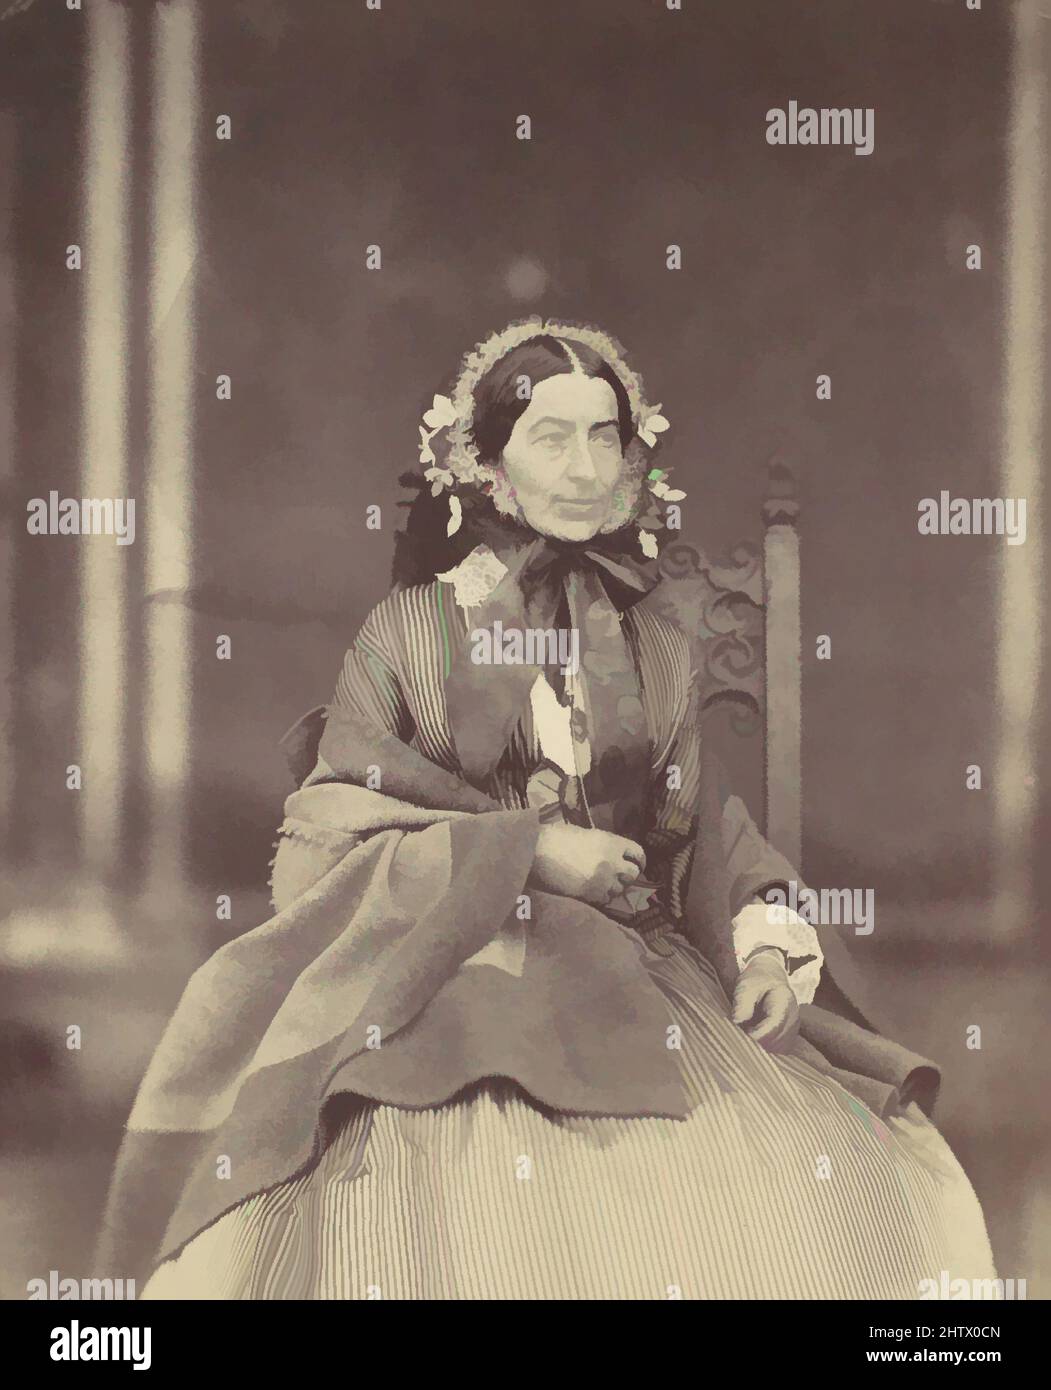 Art inspired by Elisabeth Höusermann, 1850s–60s, Albumen silver print from glass negative, 25.4 x 19.3 cm. (10 x 7 5/8 in.), Photographs, Franz Antoine (Austrian, 1814–1882, Classic works modernized by Artotop with a splash of modernity. Shapes, color and value, eye-catching visual impact on art. Emotions through freedom of artworks in a contemporary way. A timeless message pursuing a wildly creative new direction. Artists turning to the digital medium and creating the Artotop NFT Stock Photo